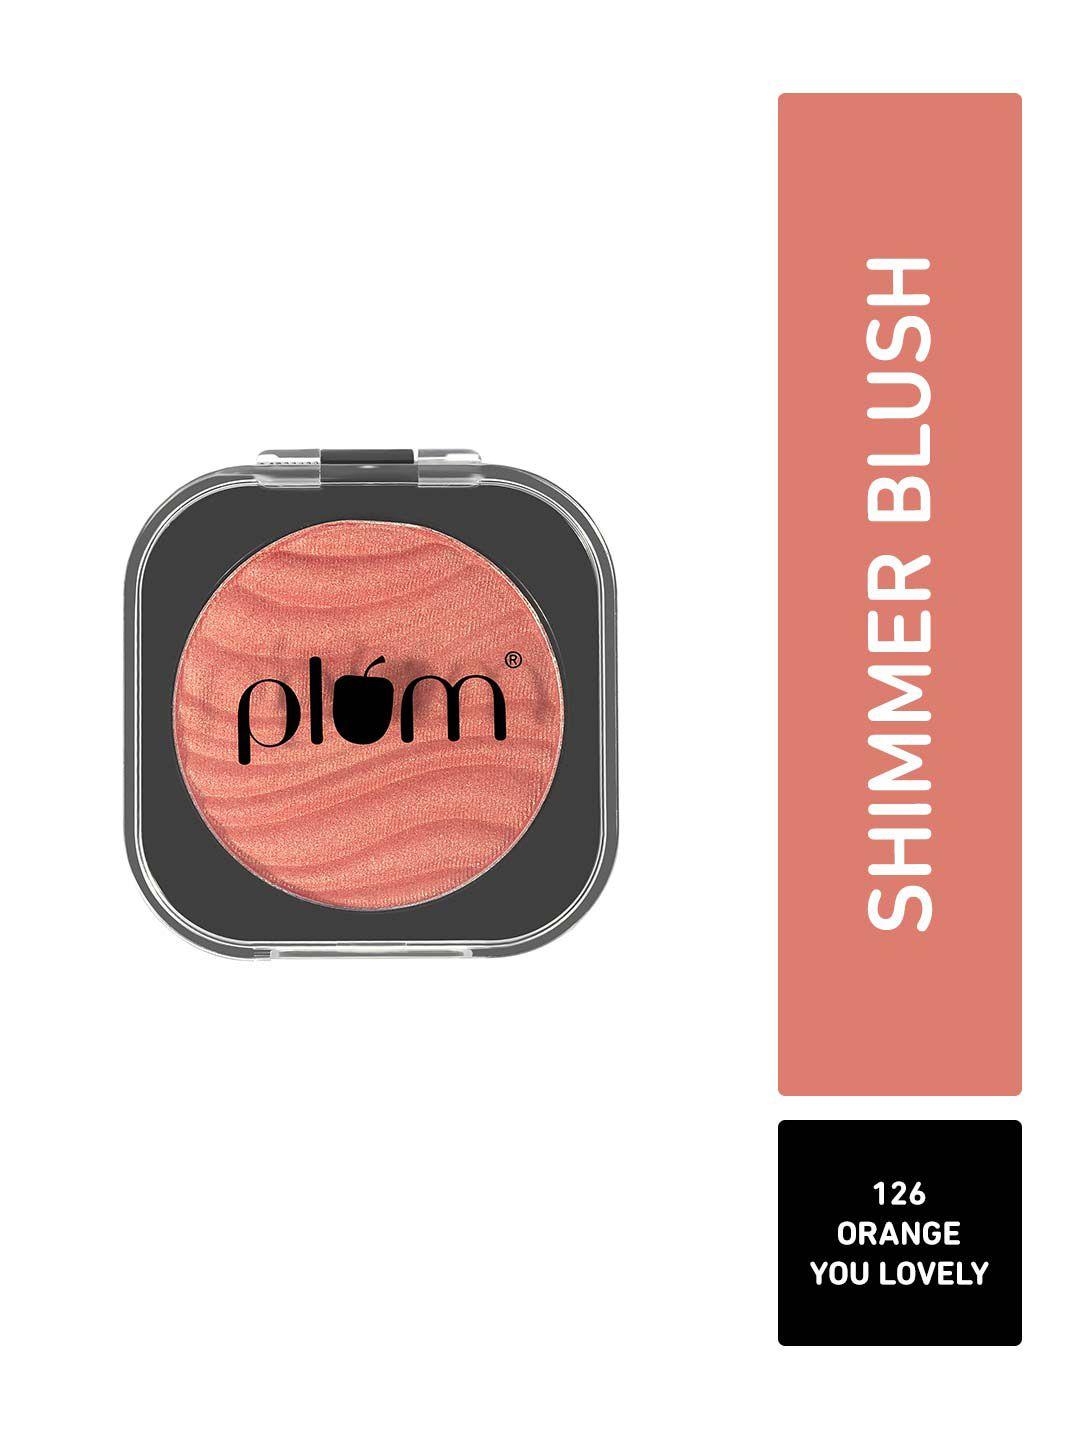 plum cheek-a-boo highly-pigmented shimmer blush 4.5g - orange you lovely 126